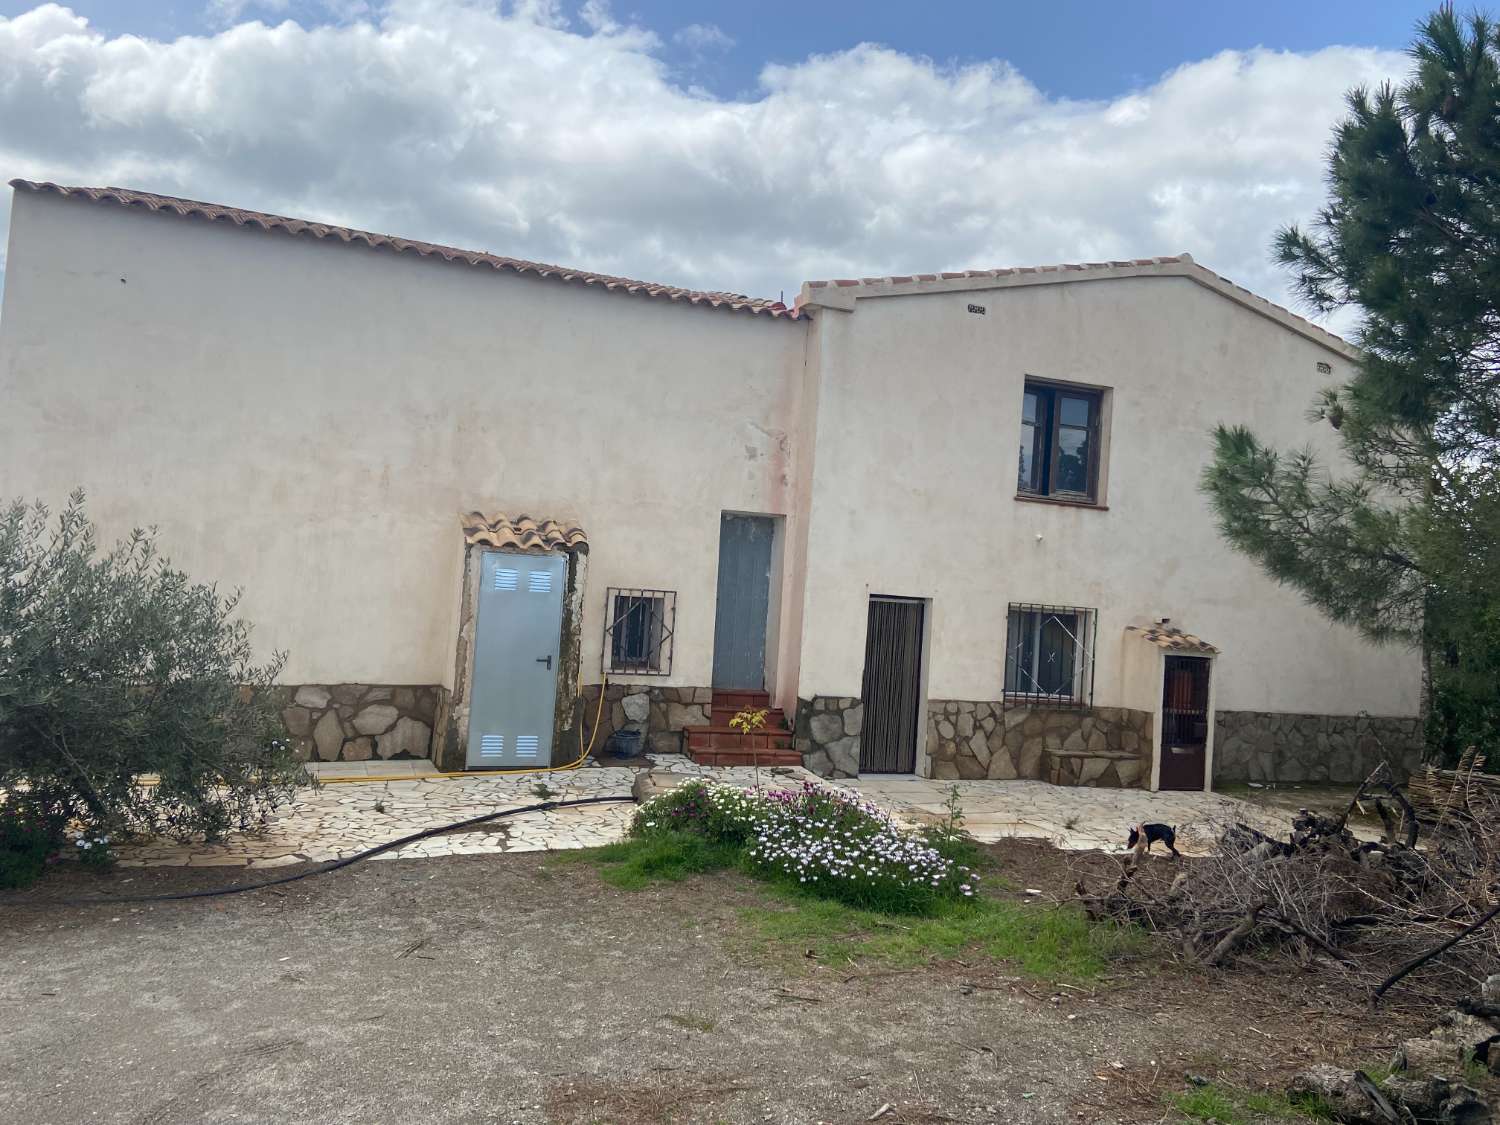 Fully renovated 5 Bed 1 Bath Farmhouse with irrigated land in Taberno